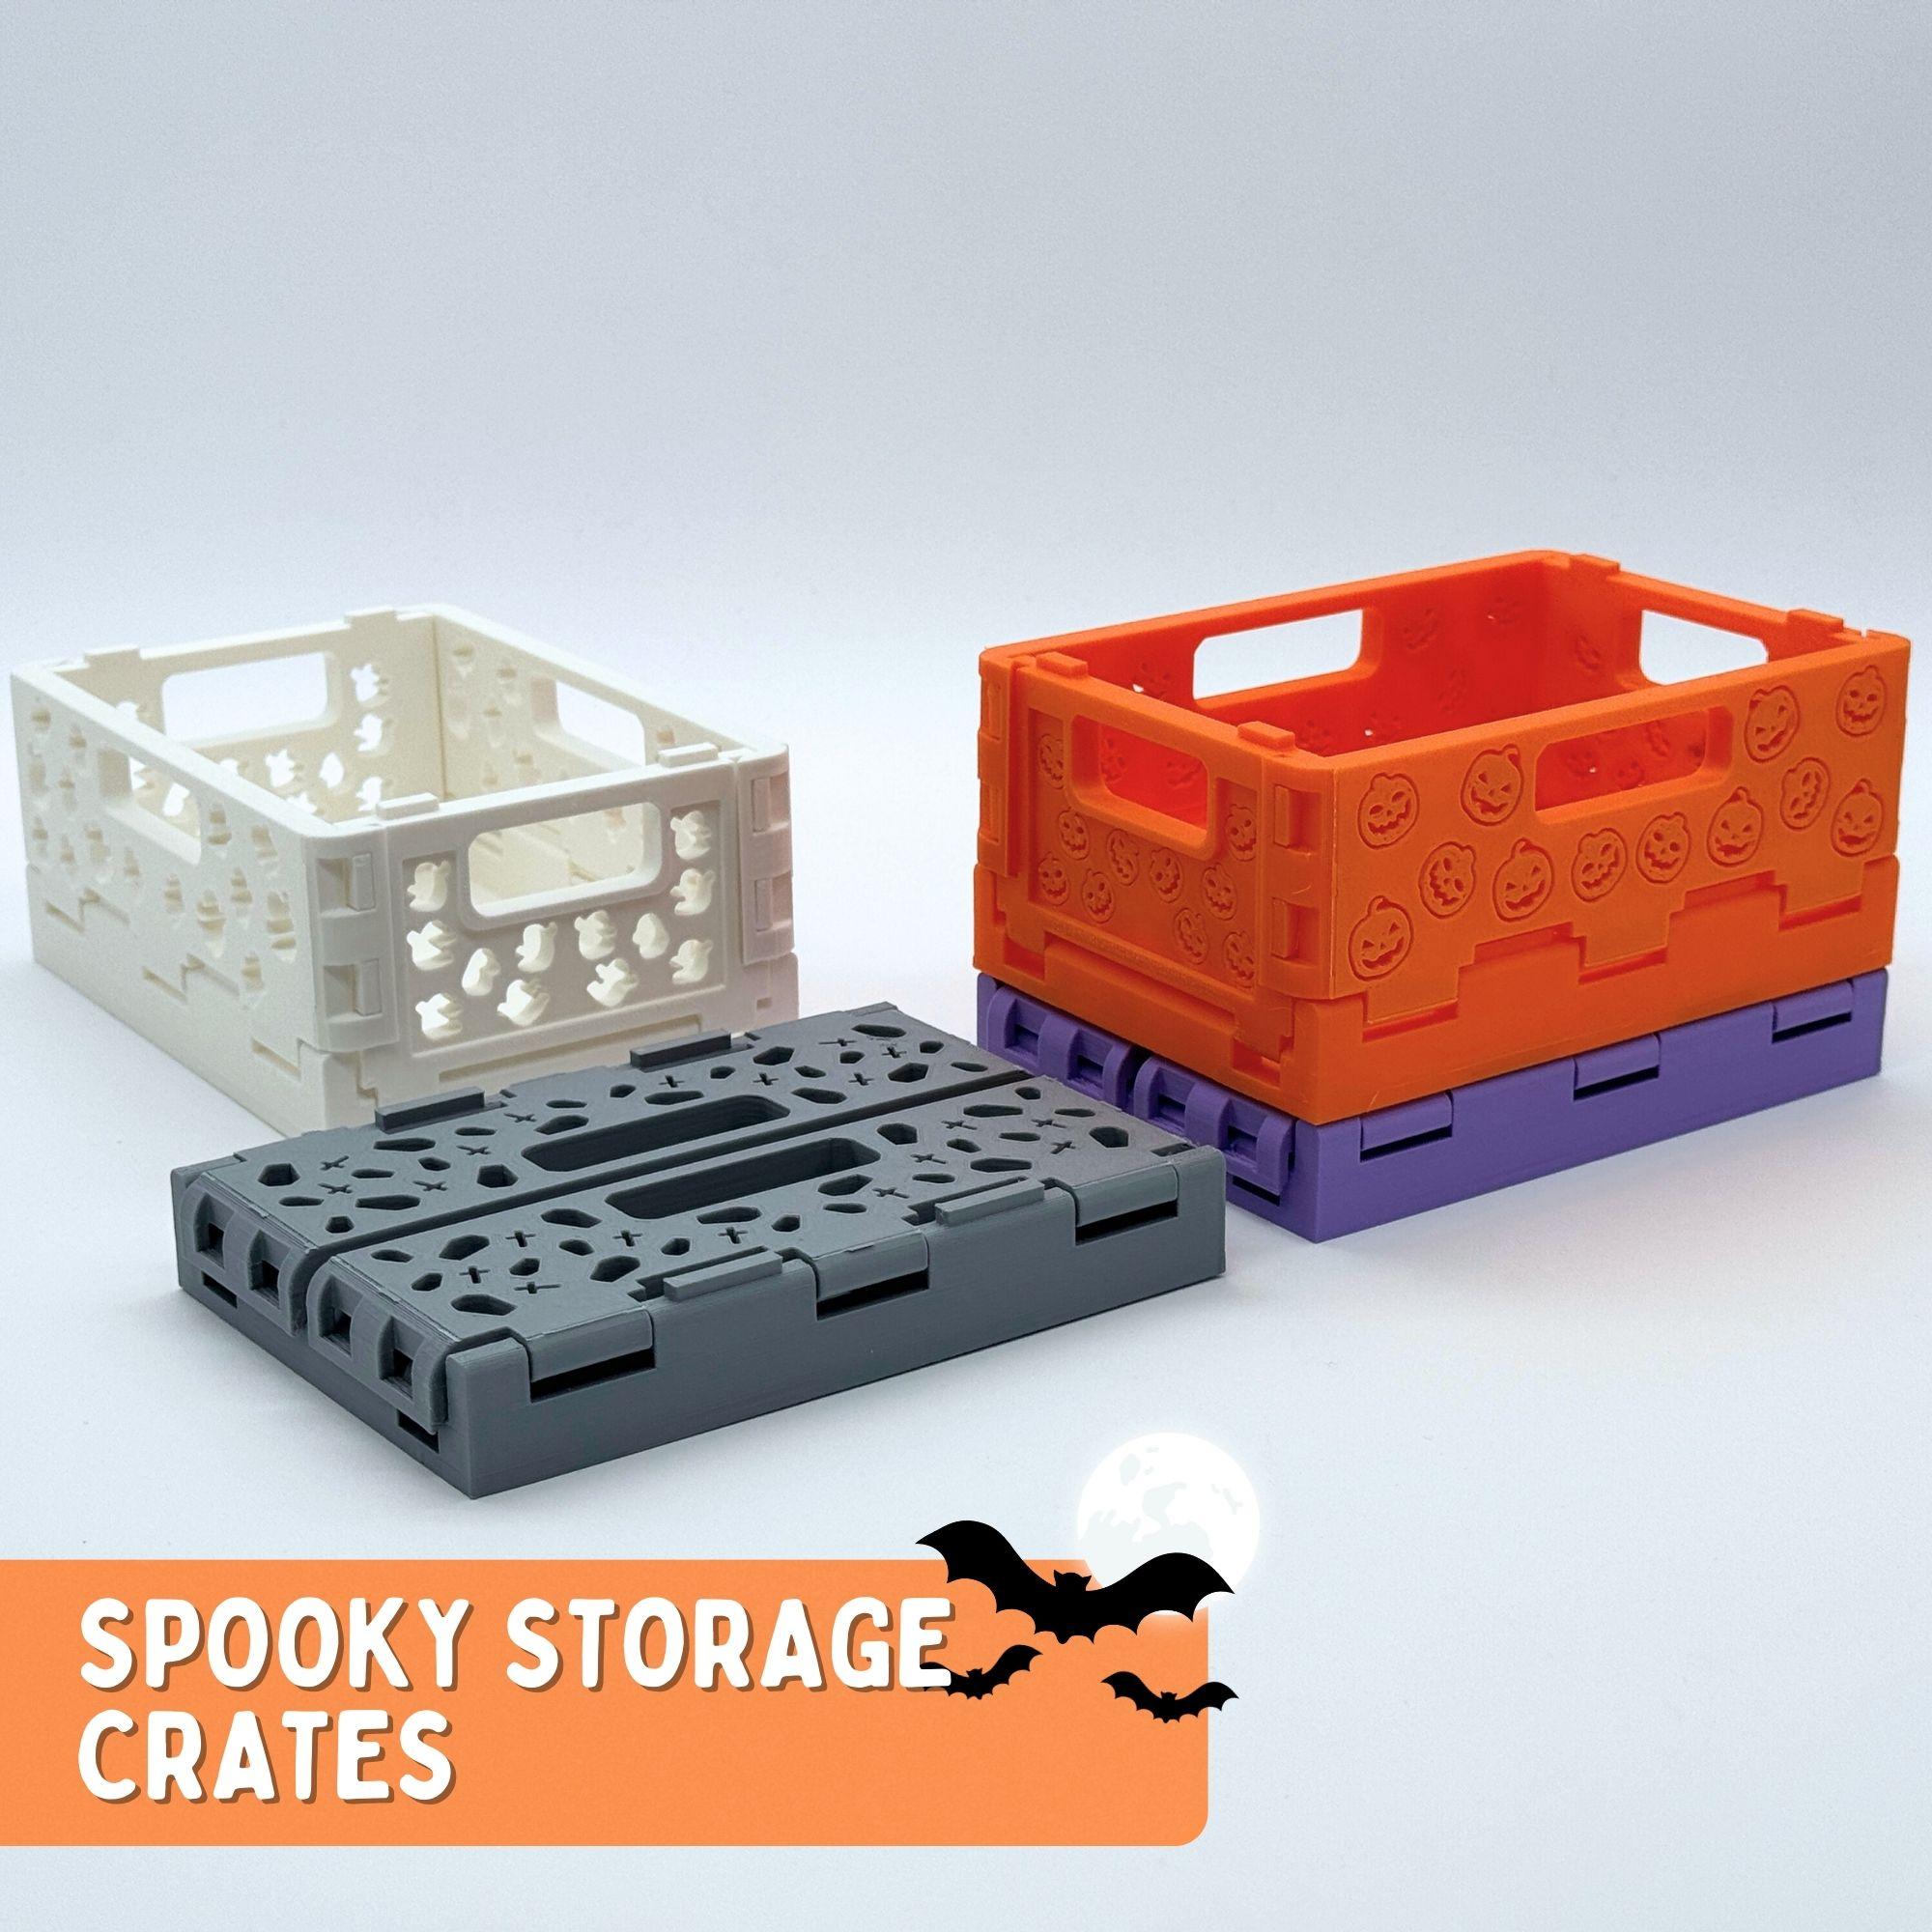 3D Printable Storage Crate Spooky Crates (4 Different Patterns) 3d model